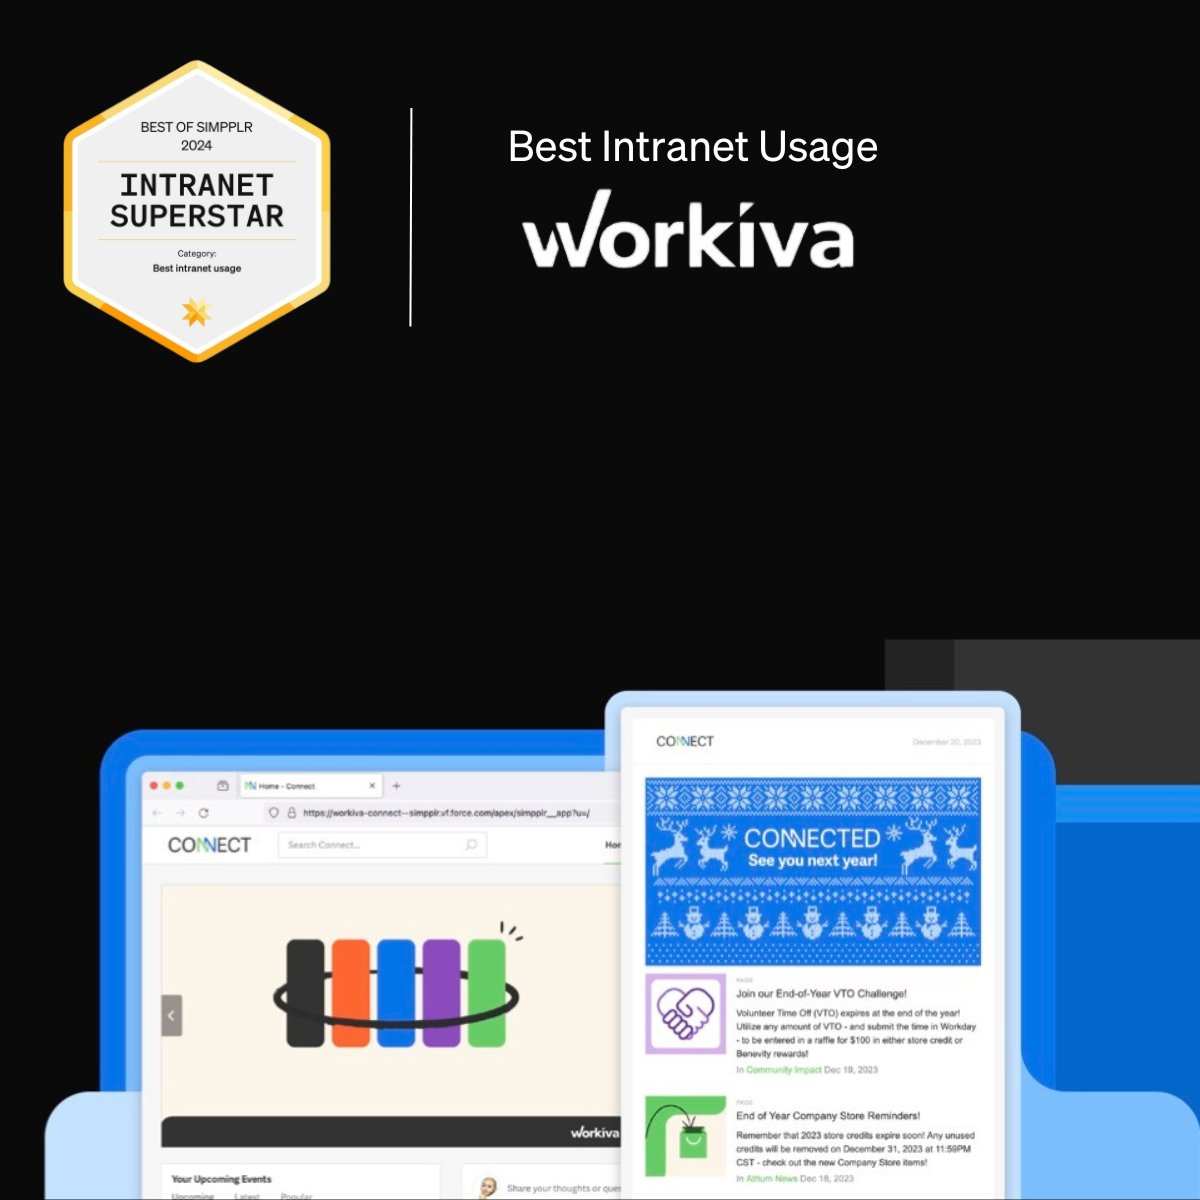 🌟 Huge congratulations to Workiva, honored as one of our #Intranet Superstars for Best Intranet Usage! Get inspired by success stories from our other Intranet Superstars on the blog! bit.ly/bestofsimpplr24 #BestIntranet #EmployeeEngagement #EX #bestofsimpplr #simpplr